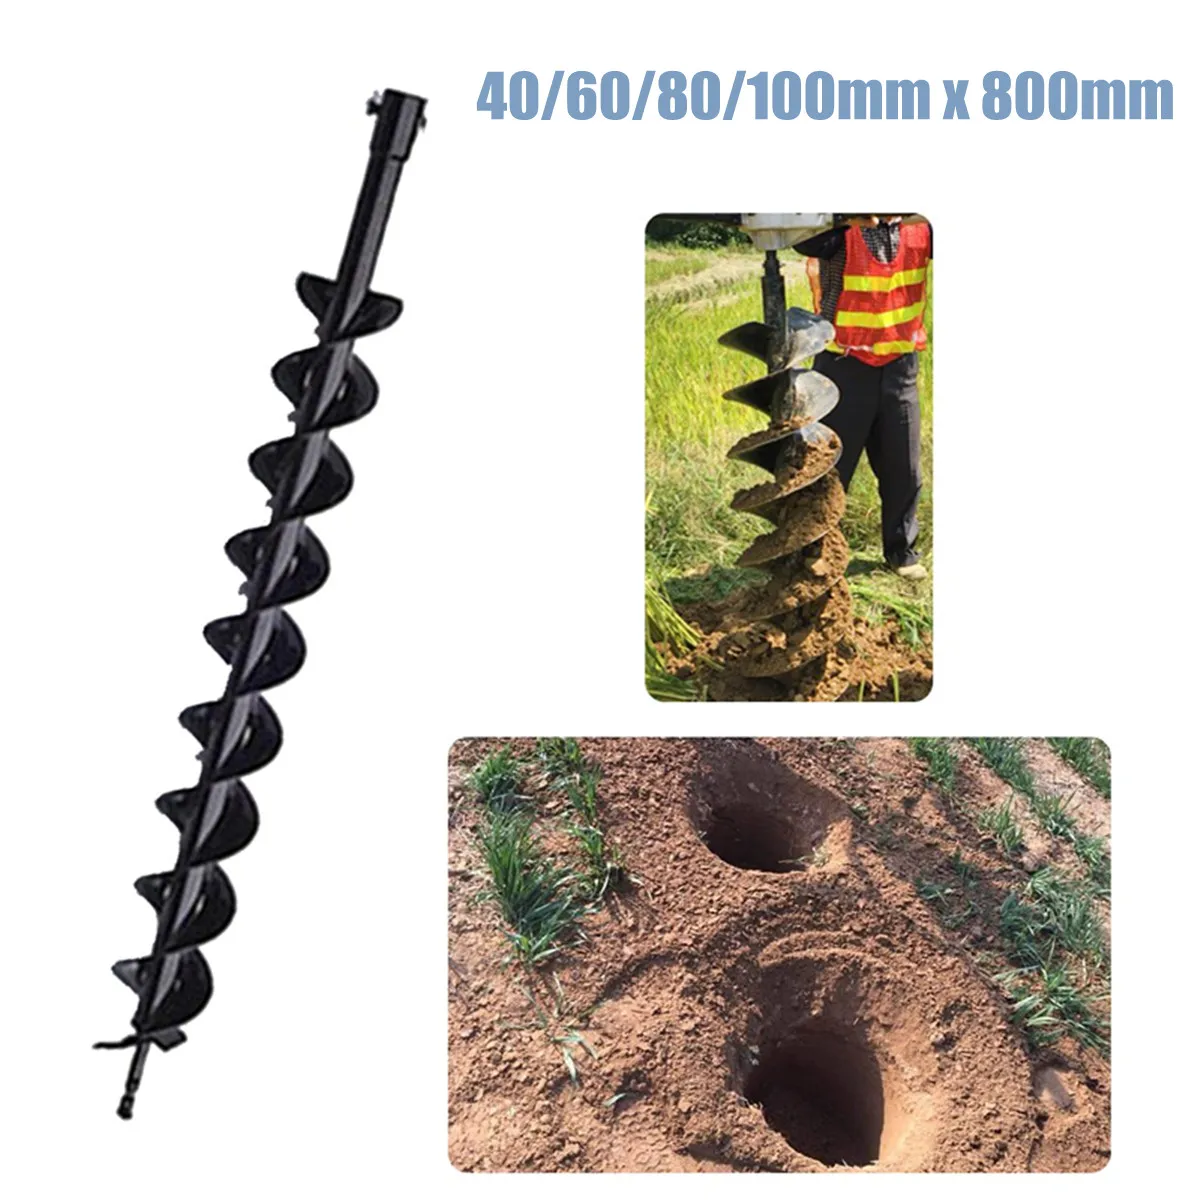 40/60/80/100mm 800mm Earth Drill Dual Blade Auger Drill Bit Fence Borer For Earth Petrol Post Hole Digger Power Tool Accessories